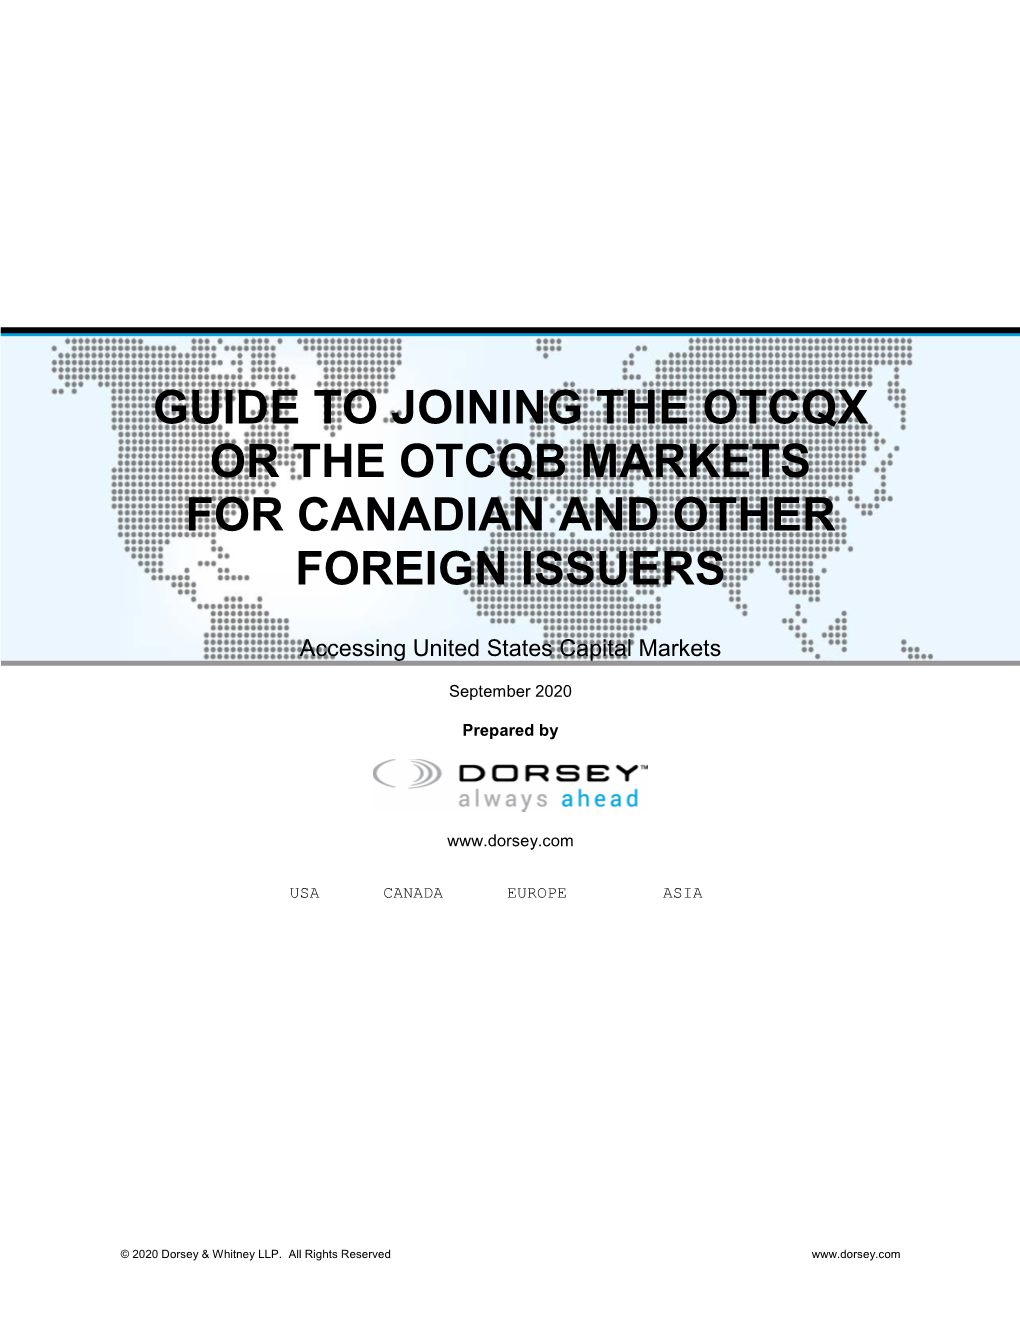 Guide to Joining the Otcqx Or the Otcqb Markets for Canadian and Other Foreign Issuers